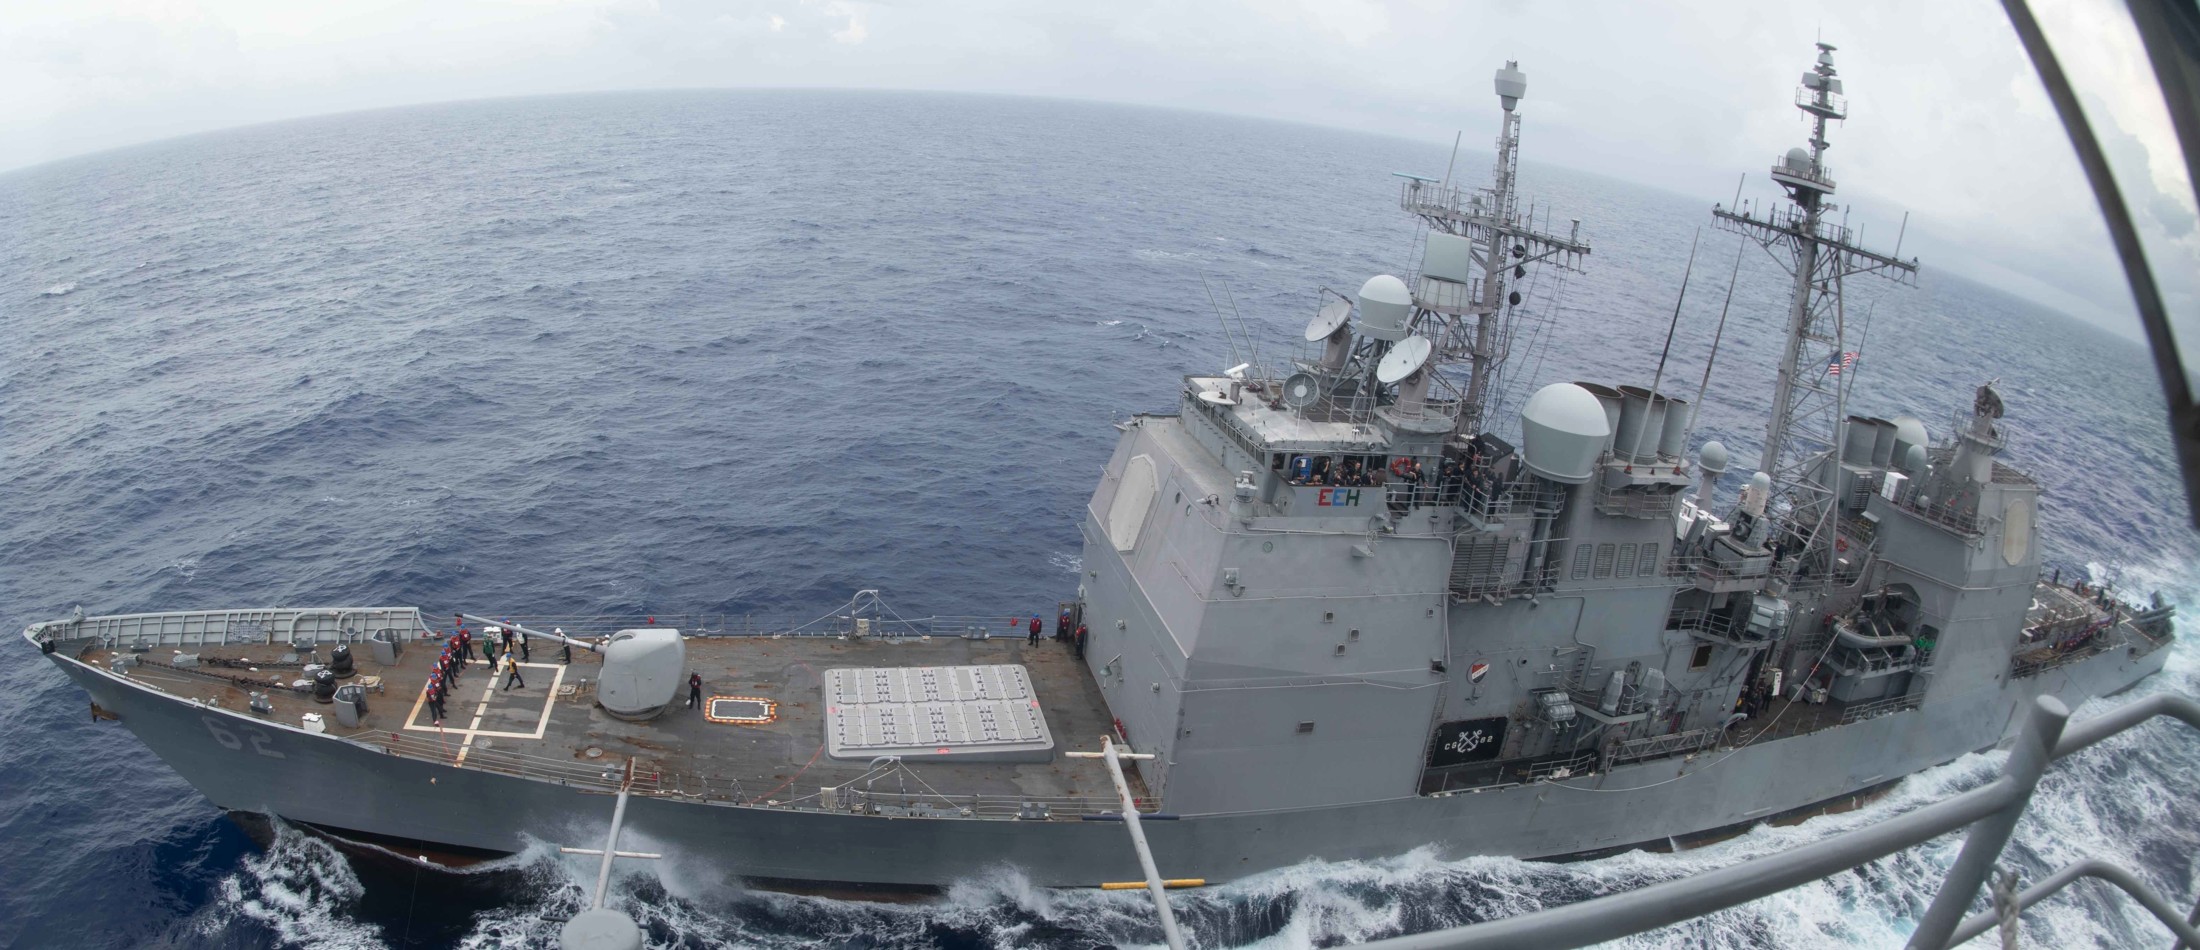 cg-62 uss chancellorsville ticonderoga class guided missile cruiser aegis us navy south china sea 99